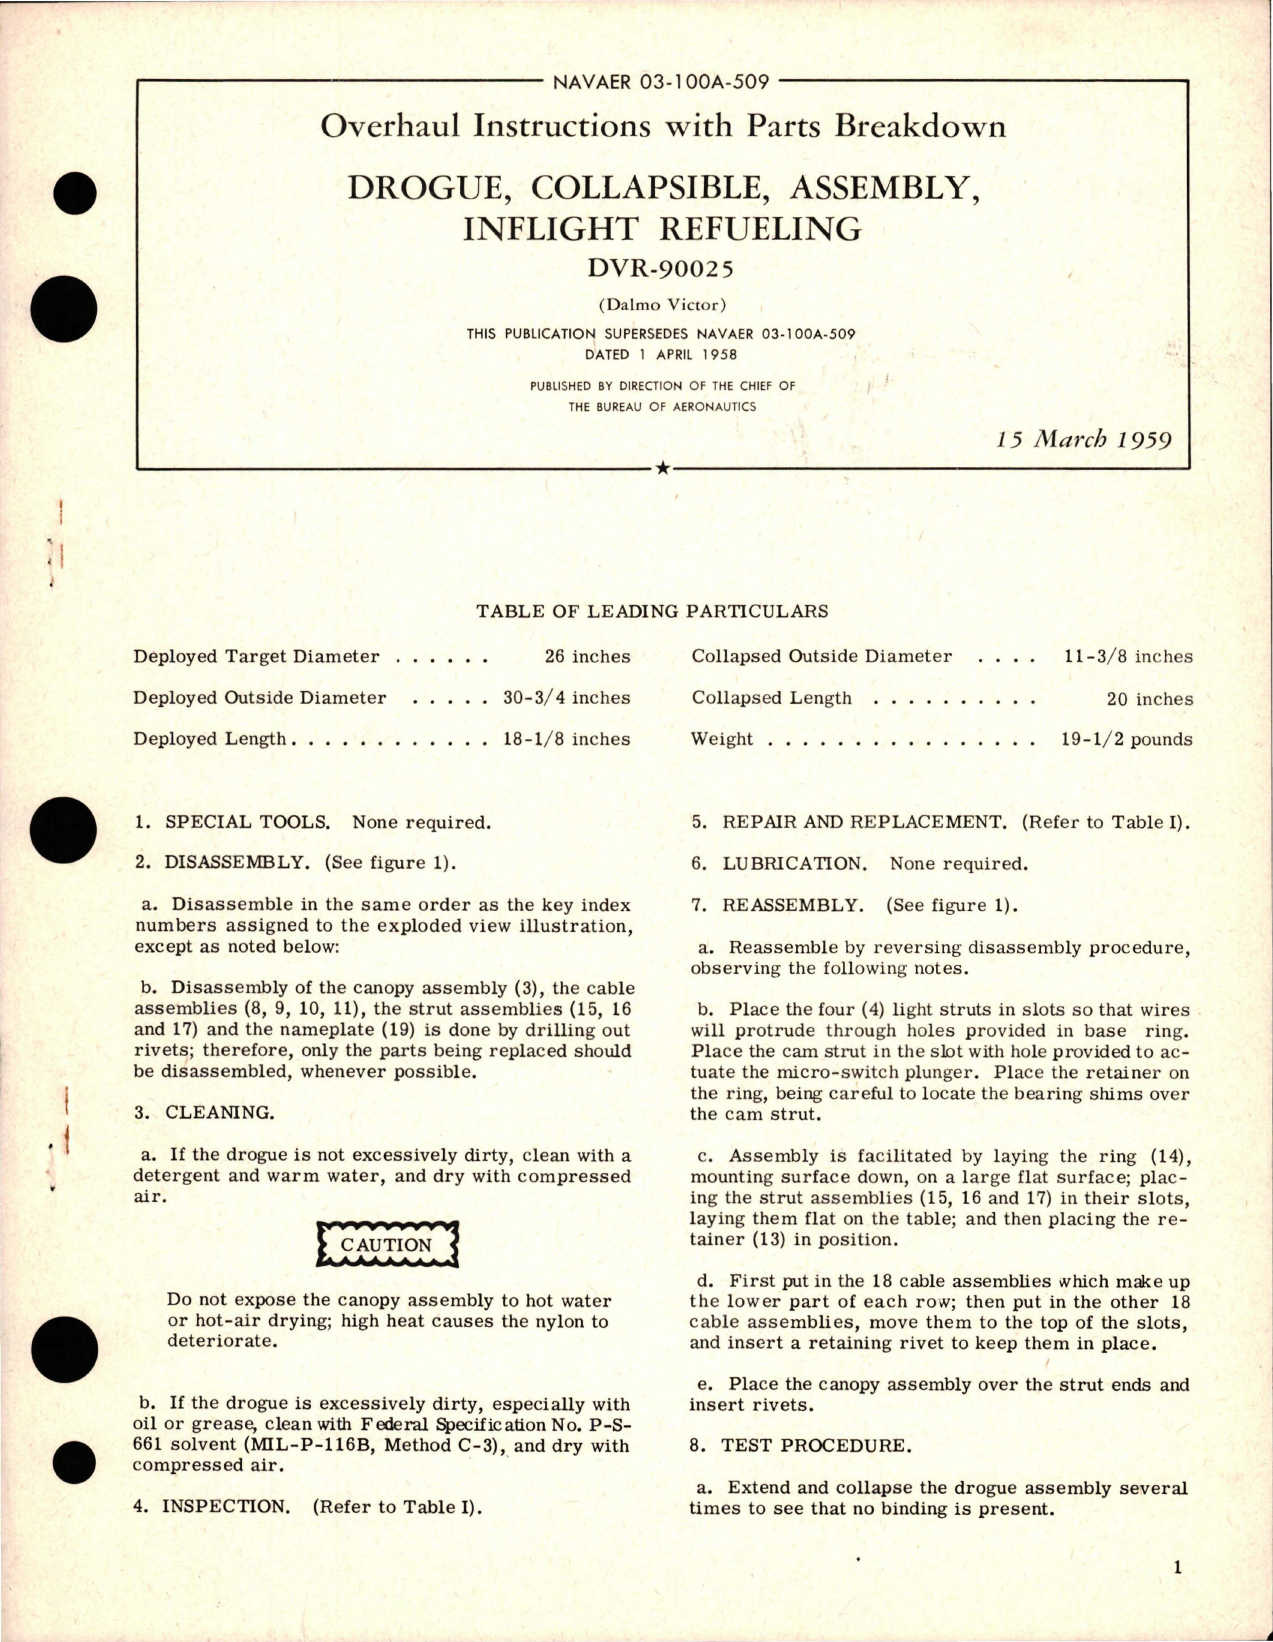 Sample page 1 from AirCorps Library document: Overhaul Instructions with Parts Breakdown for Collapsible Drogue Inflight Refueling Assembly - DVR-90025 